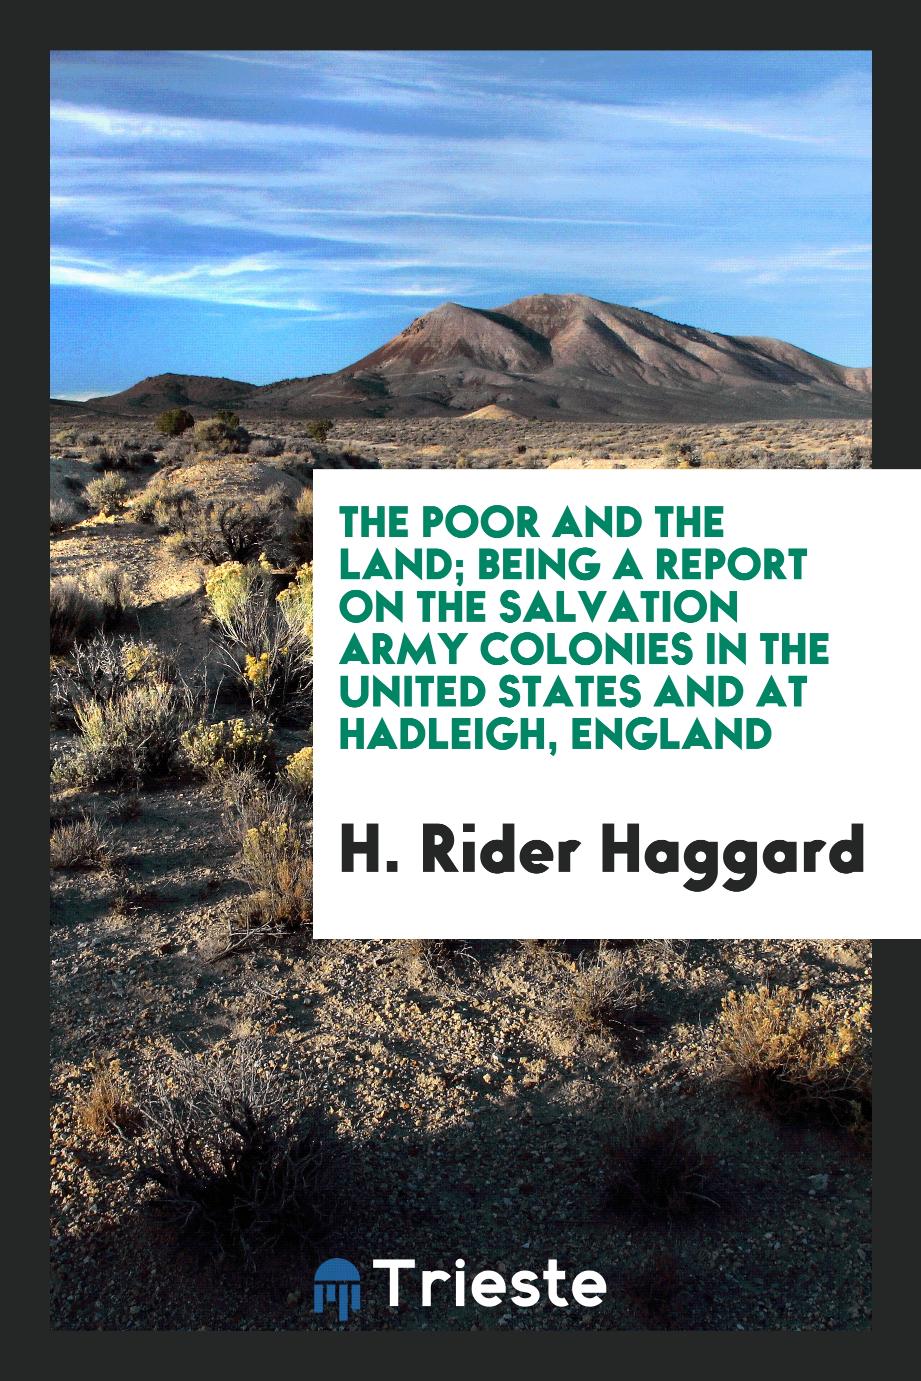 The poor and the land; being a report on the Salvation army colonies in the United States and at Hadleigh, England